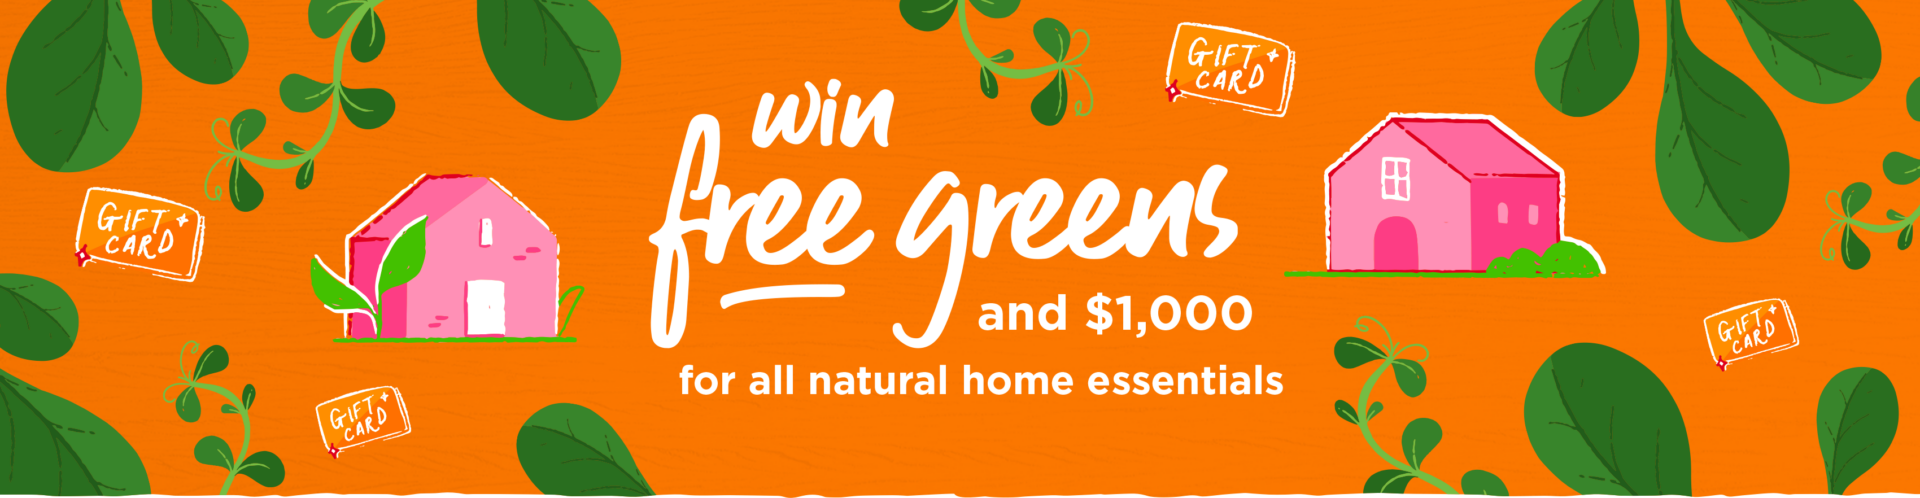 win free greens and $1,000 for all natural home essentials